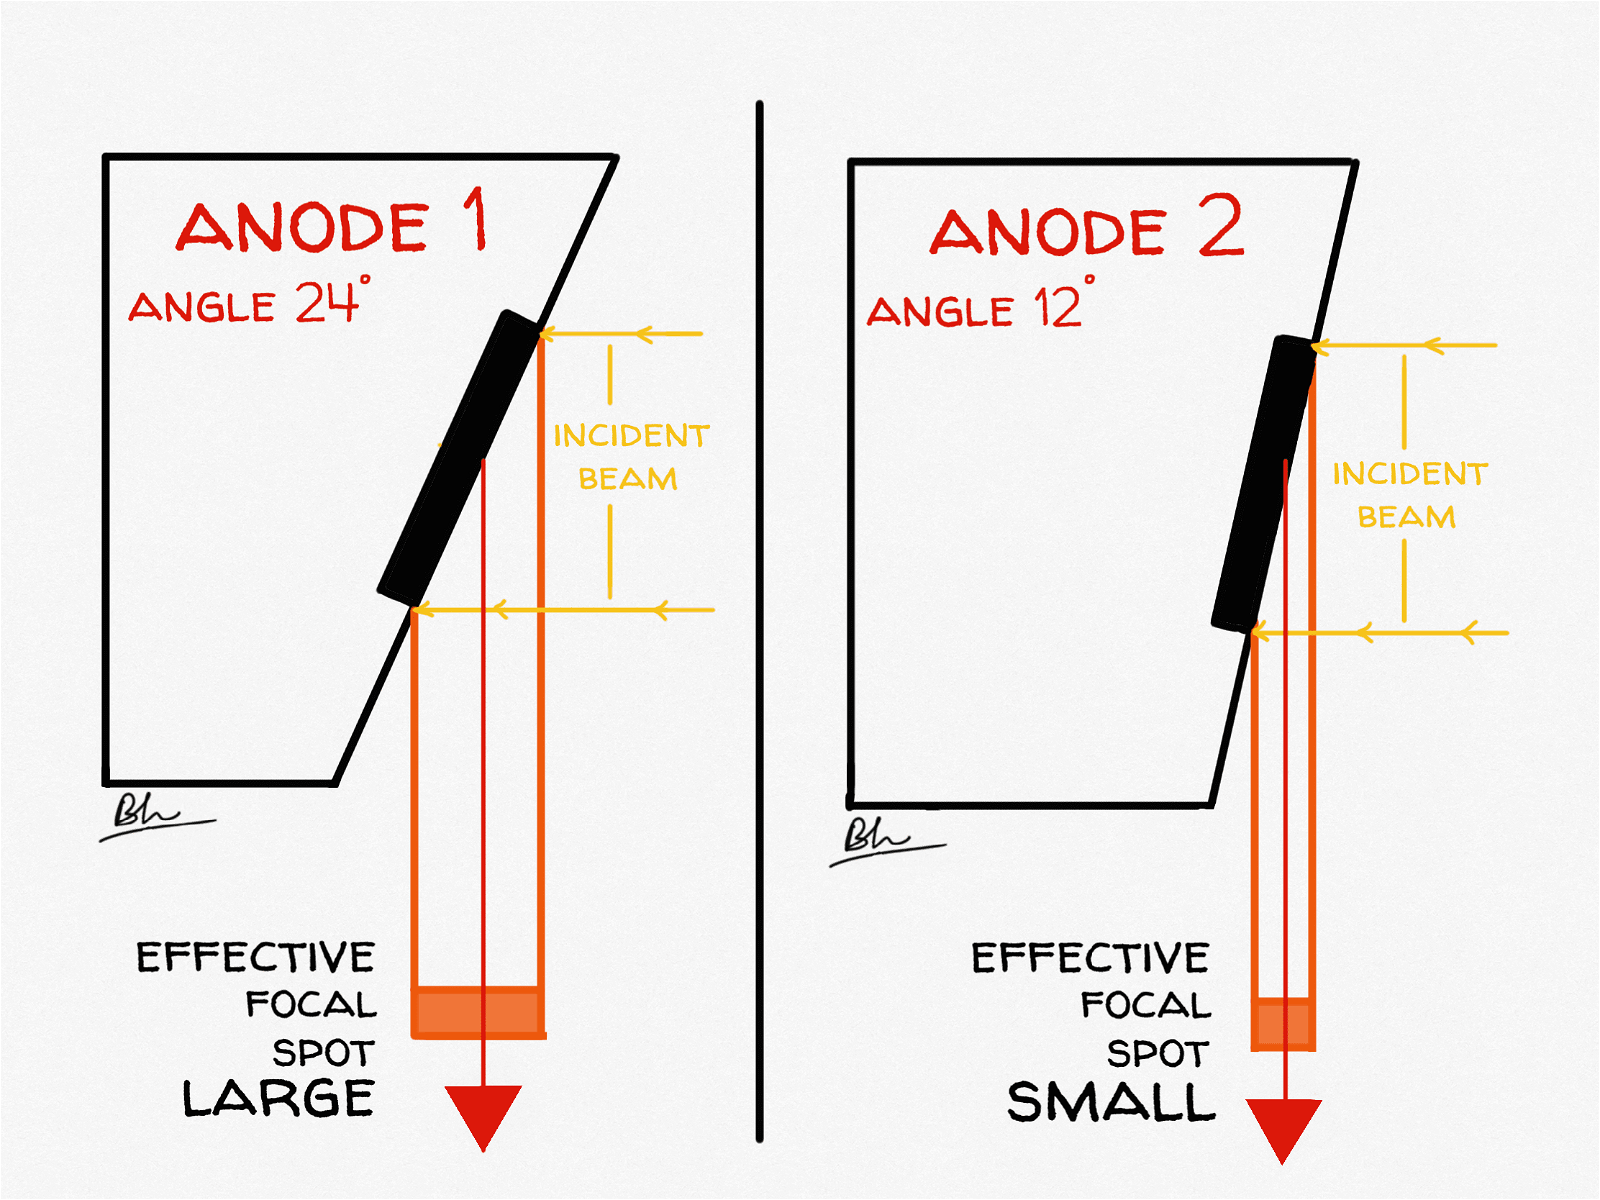 Effect of Anode Angle on Focal Spot Size